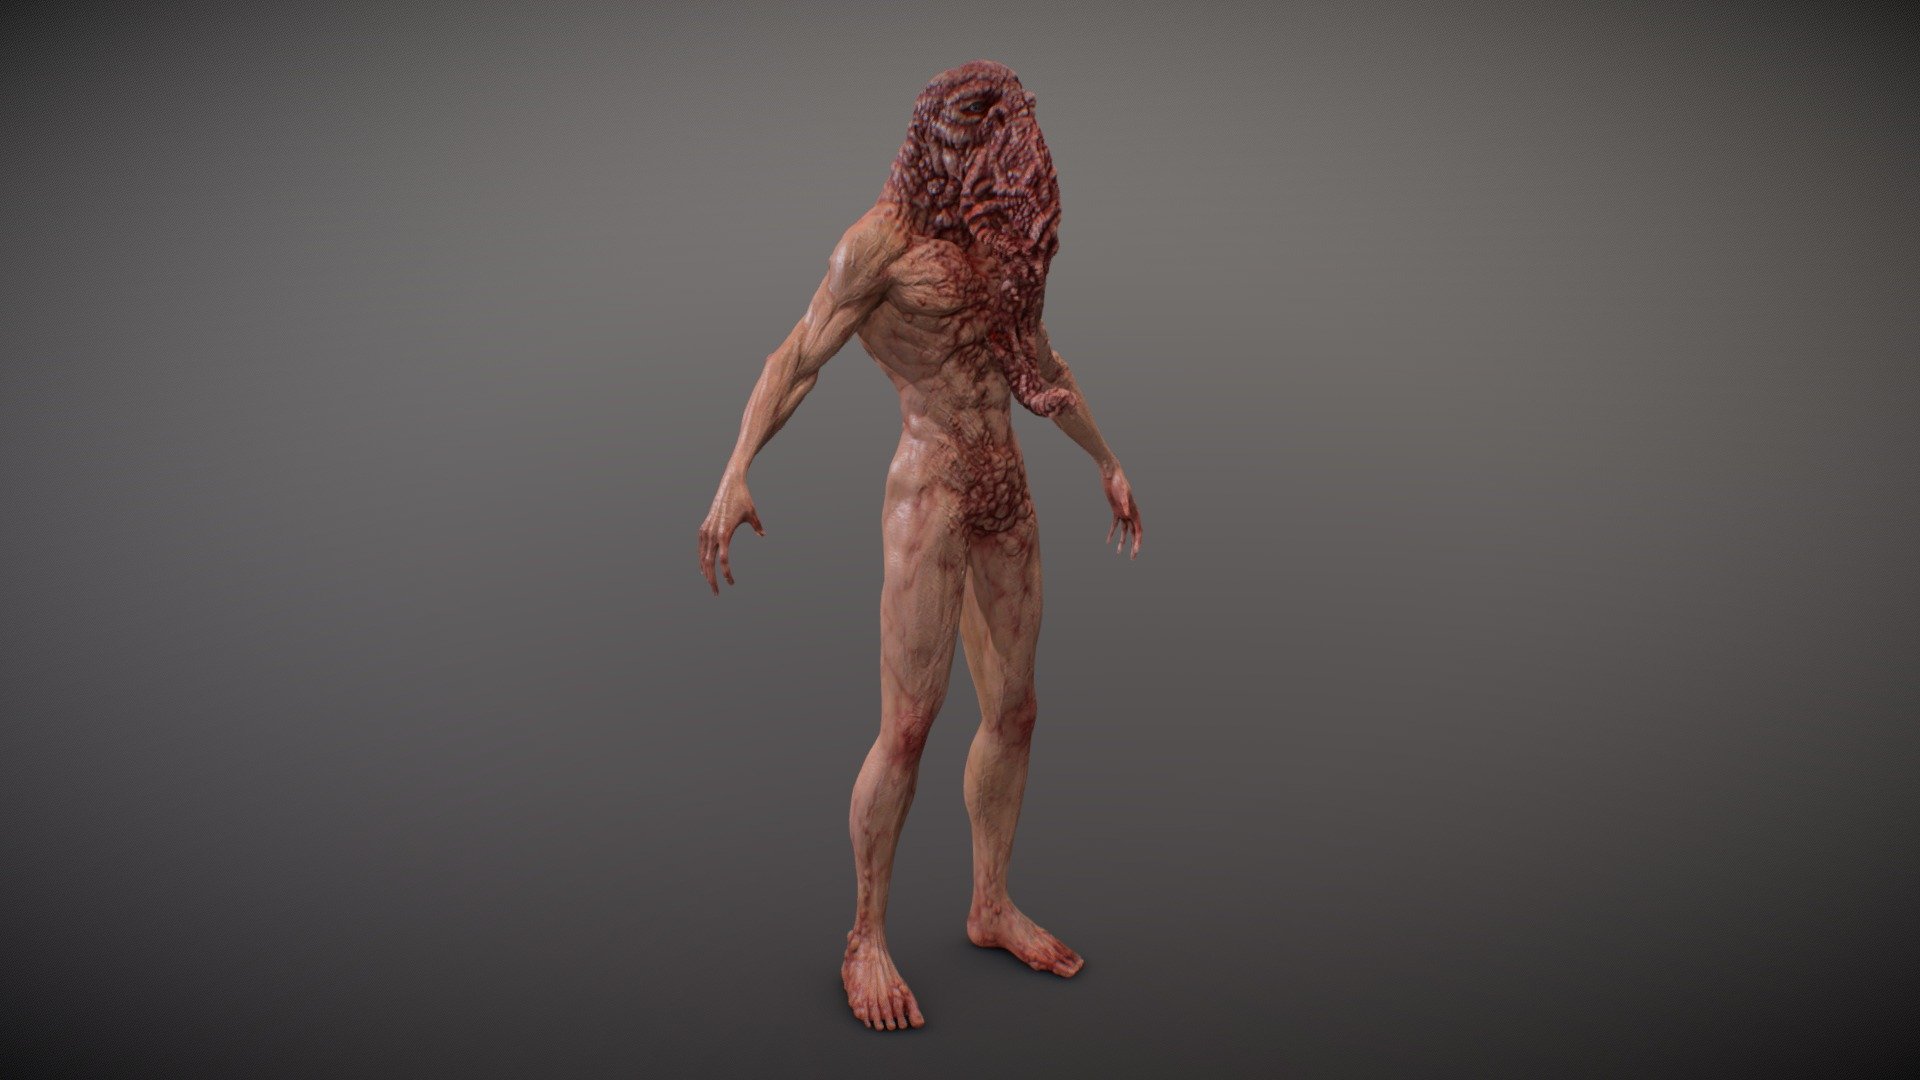 AKA Trunkman
Another mutant from the Wastes 3d model